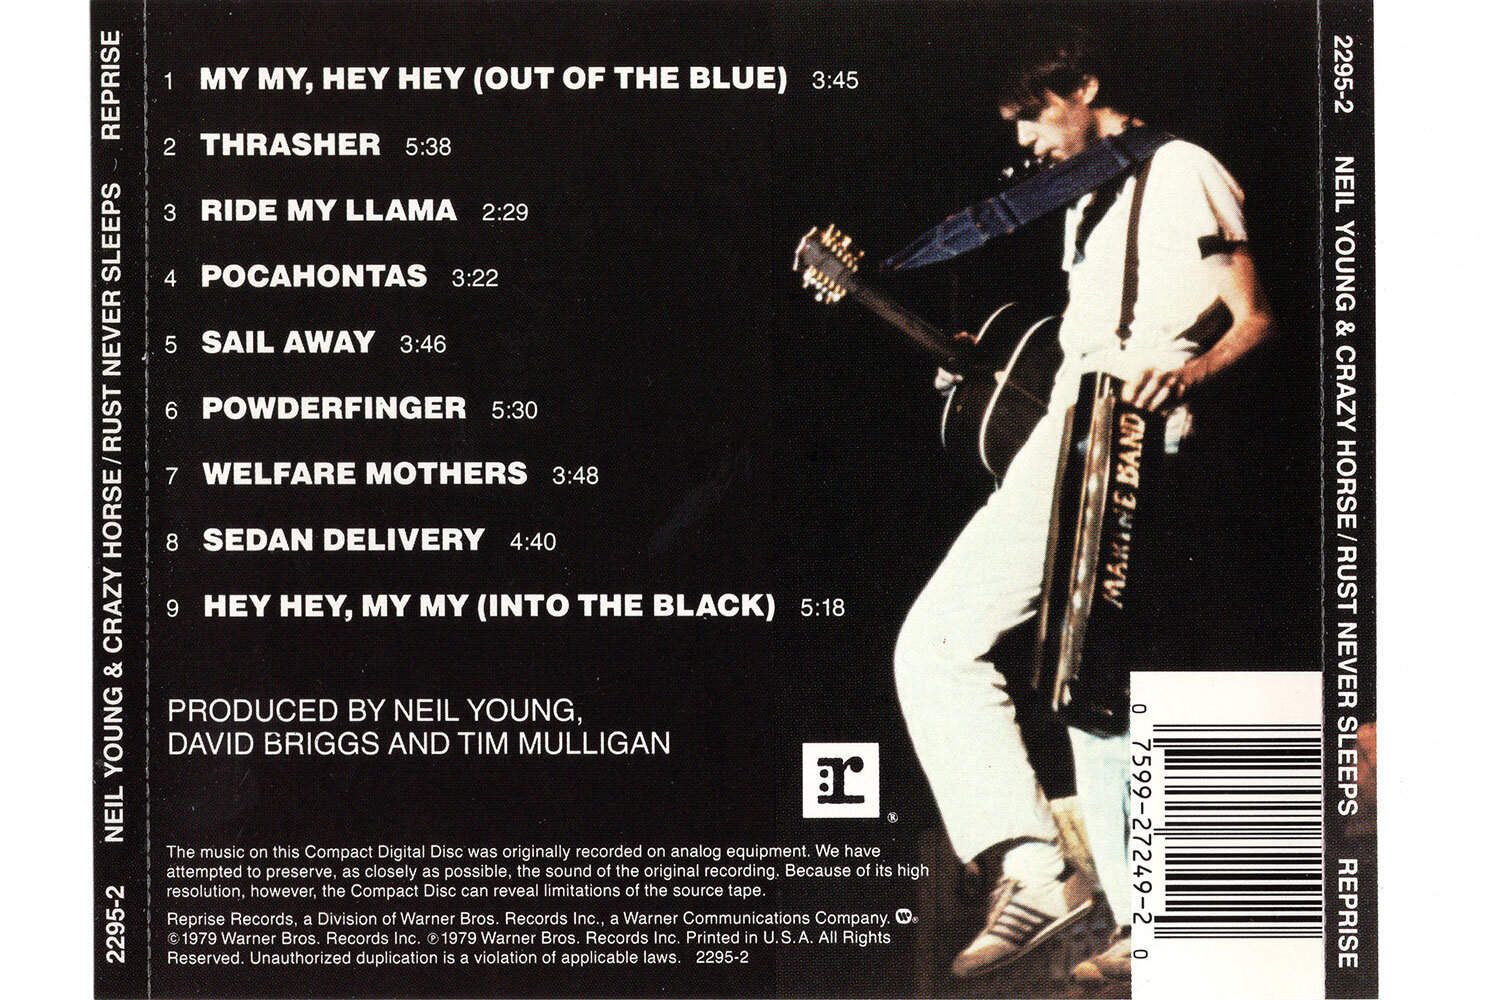 Neil Young Rust Never Sleeps rear cd cover with track list